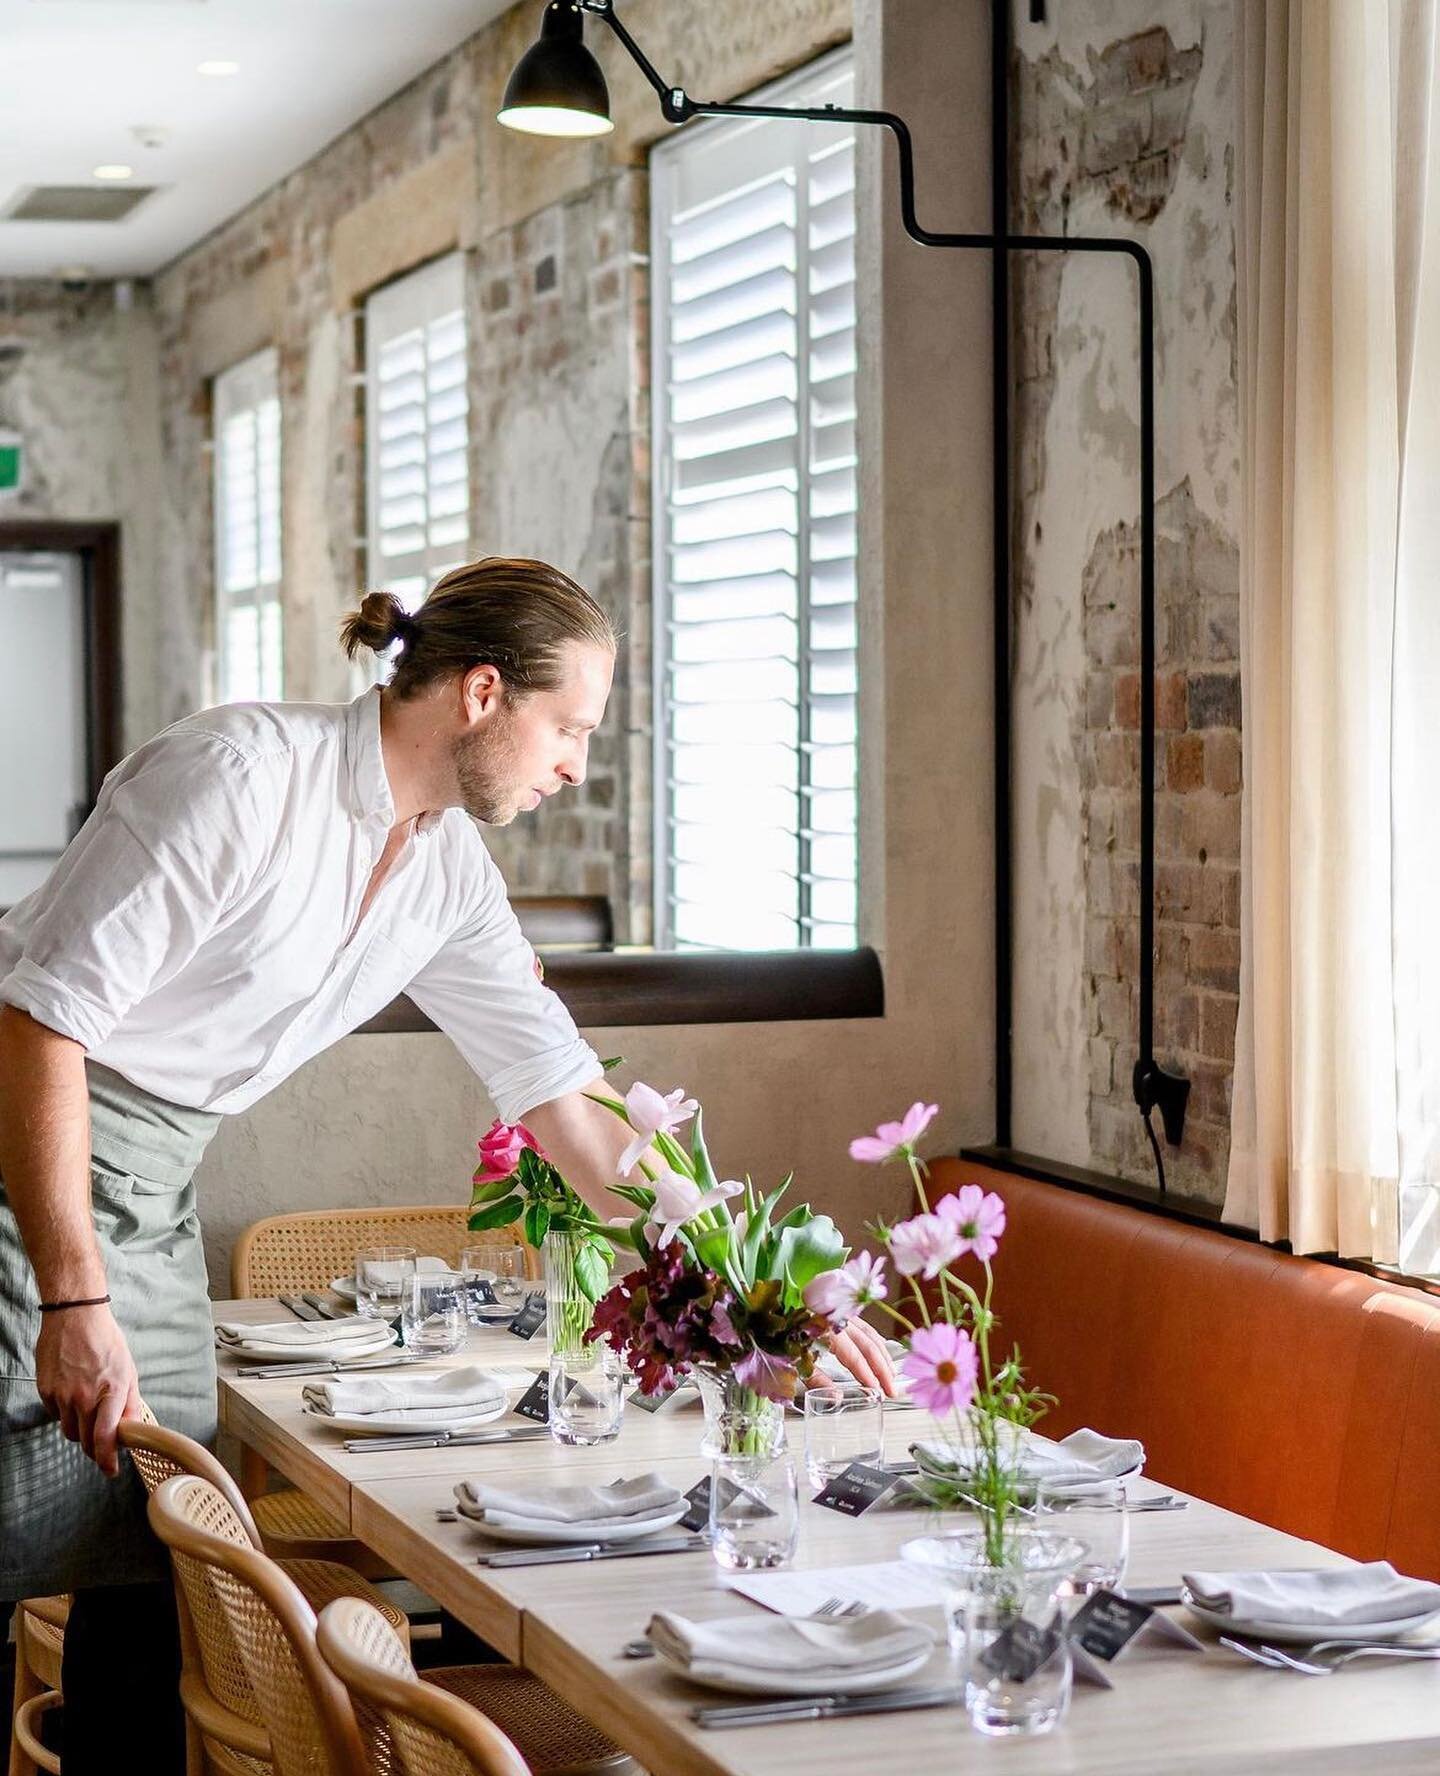 Revel in warm sourdough with olive oil straight from Sofia&rsquo;s groves in Greece, or try pomegranate cured ocean trout, grilled shark bay prawns, and baked kataifi pastry to name a few dishes on Sofia&rsquo;s Mother&rsquo;s Day banquet menu.  The 